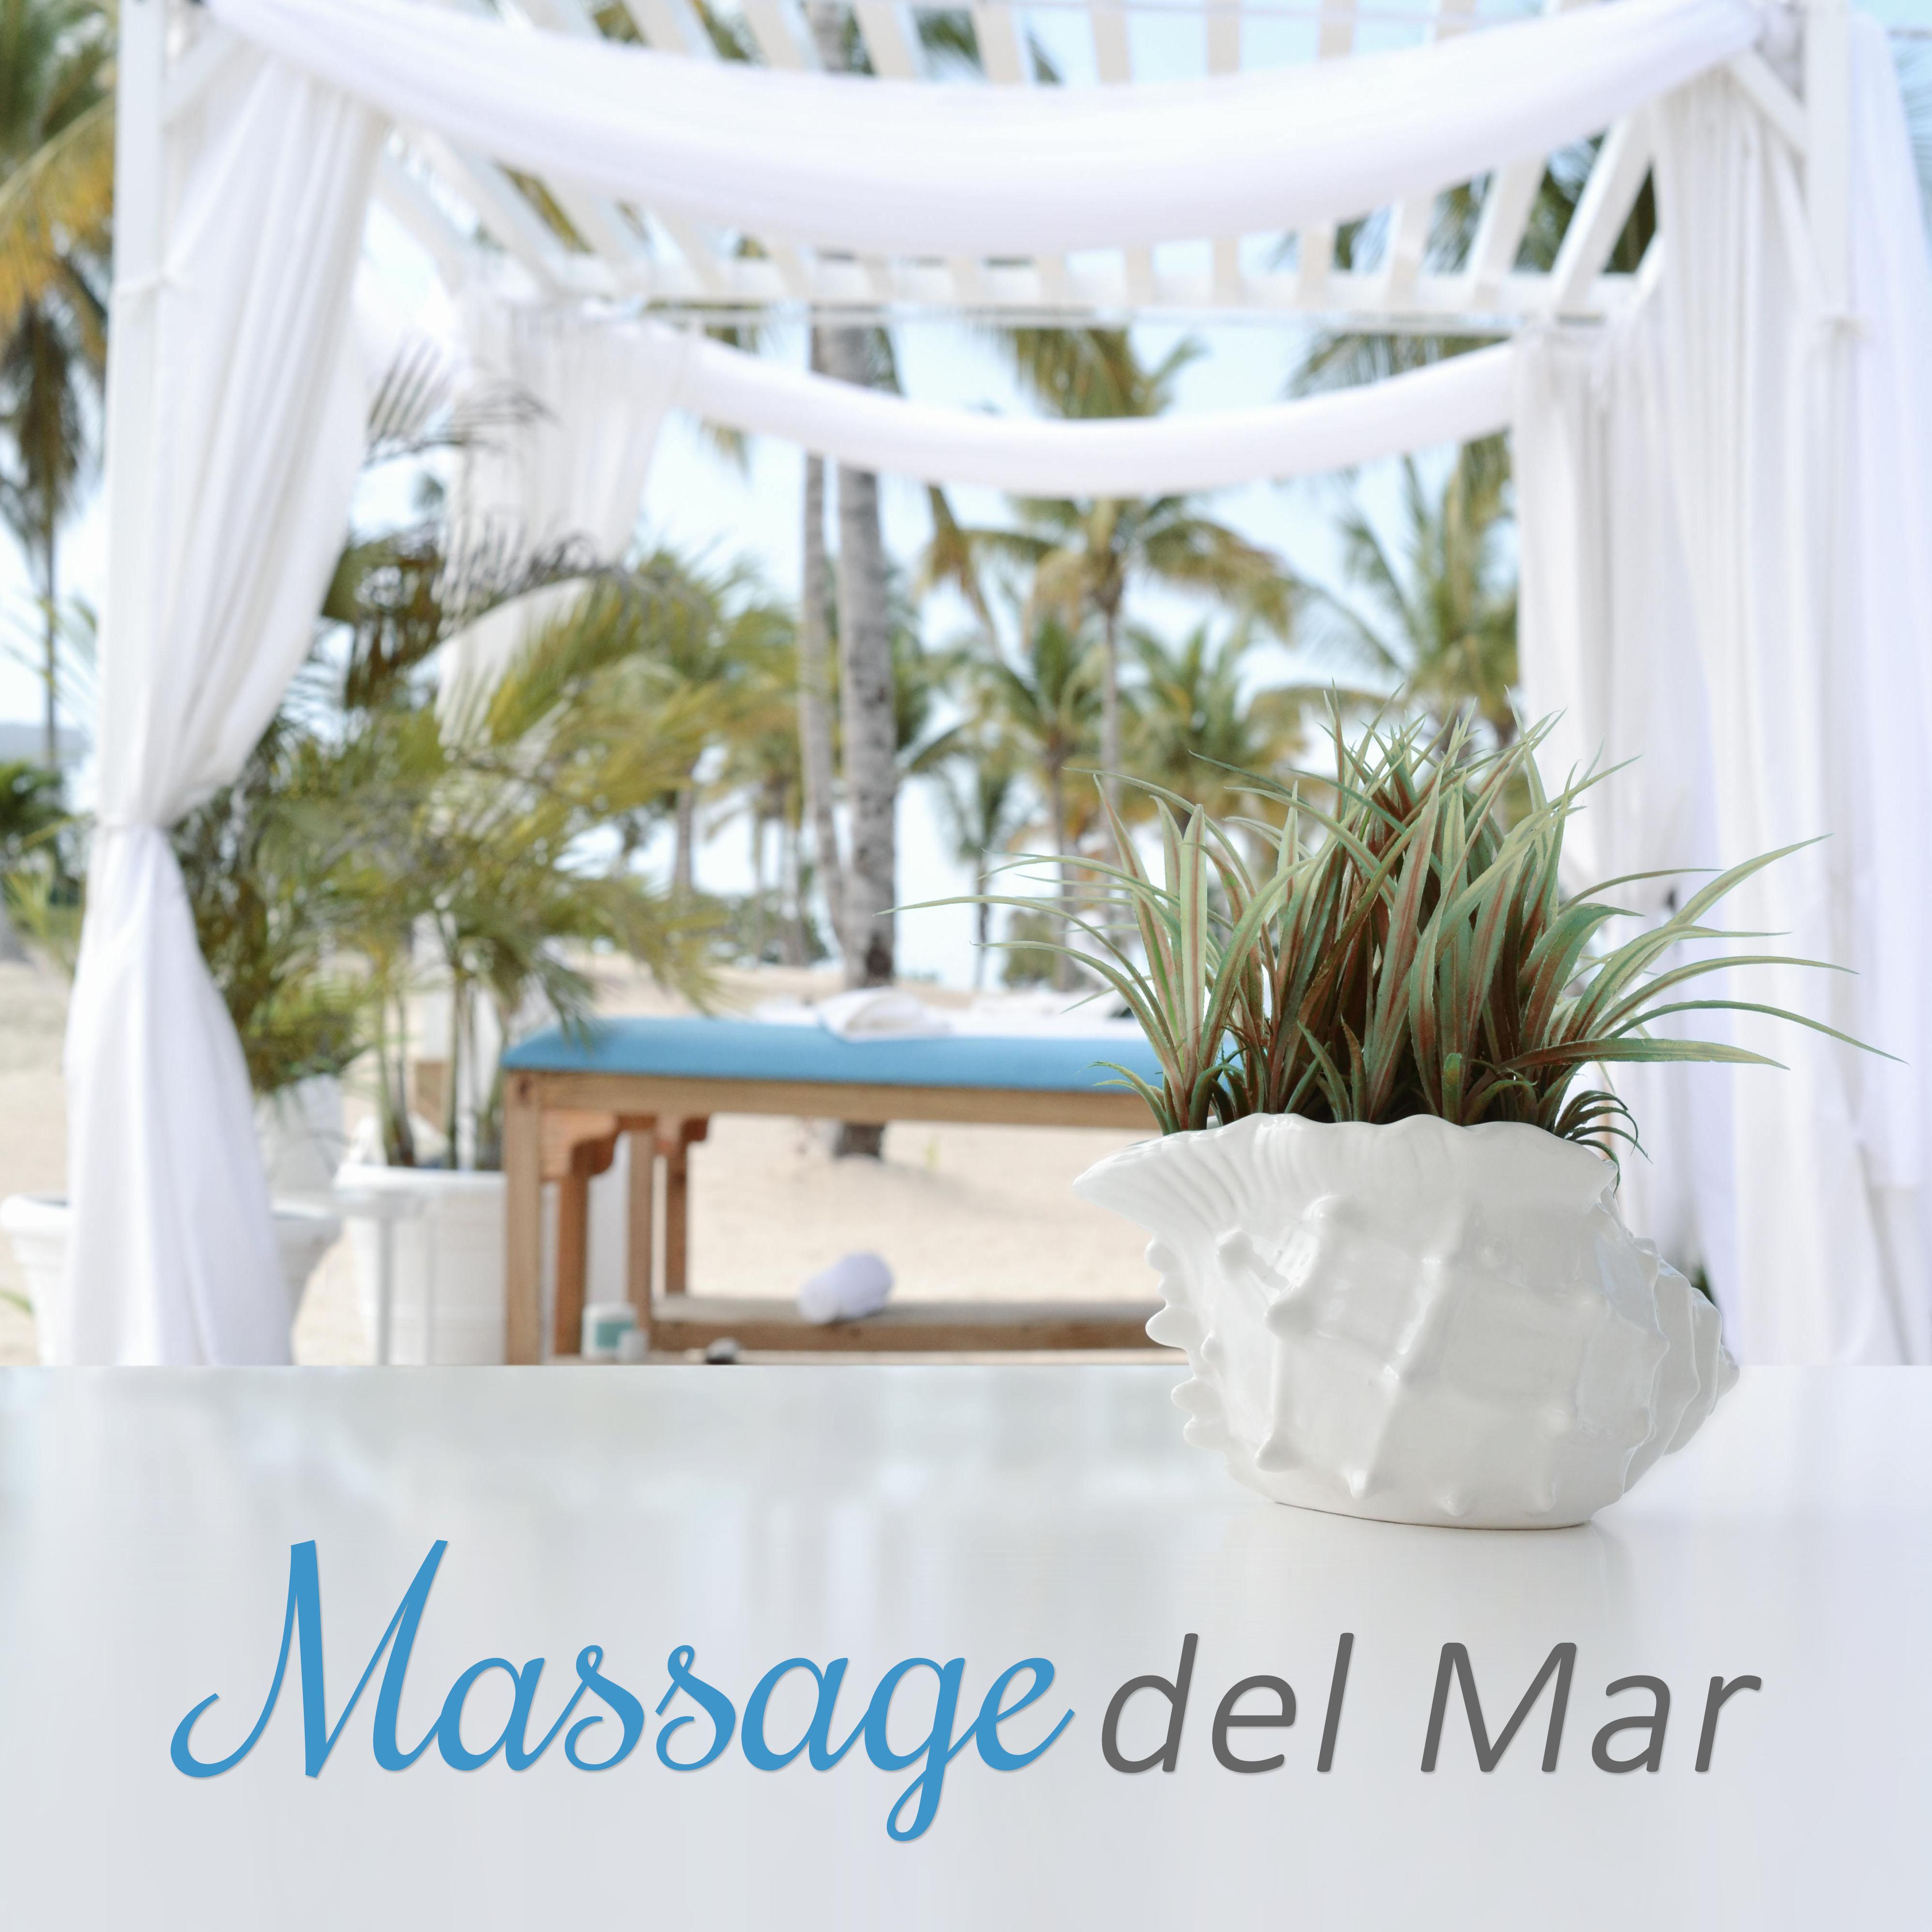 Massage del Mar  Soothing Sounds for Rest, Healing by Touch, Sensual Massage